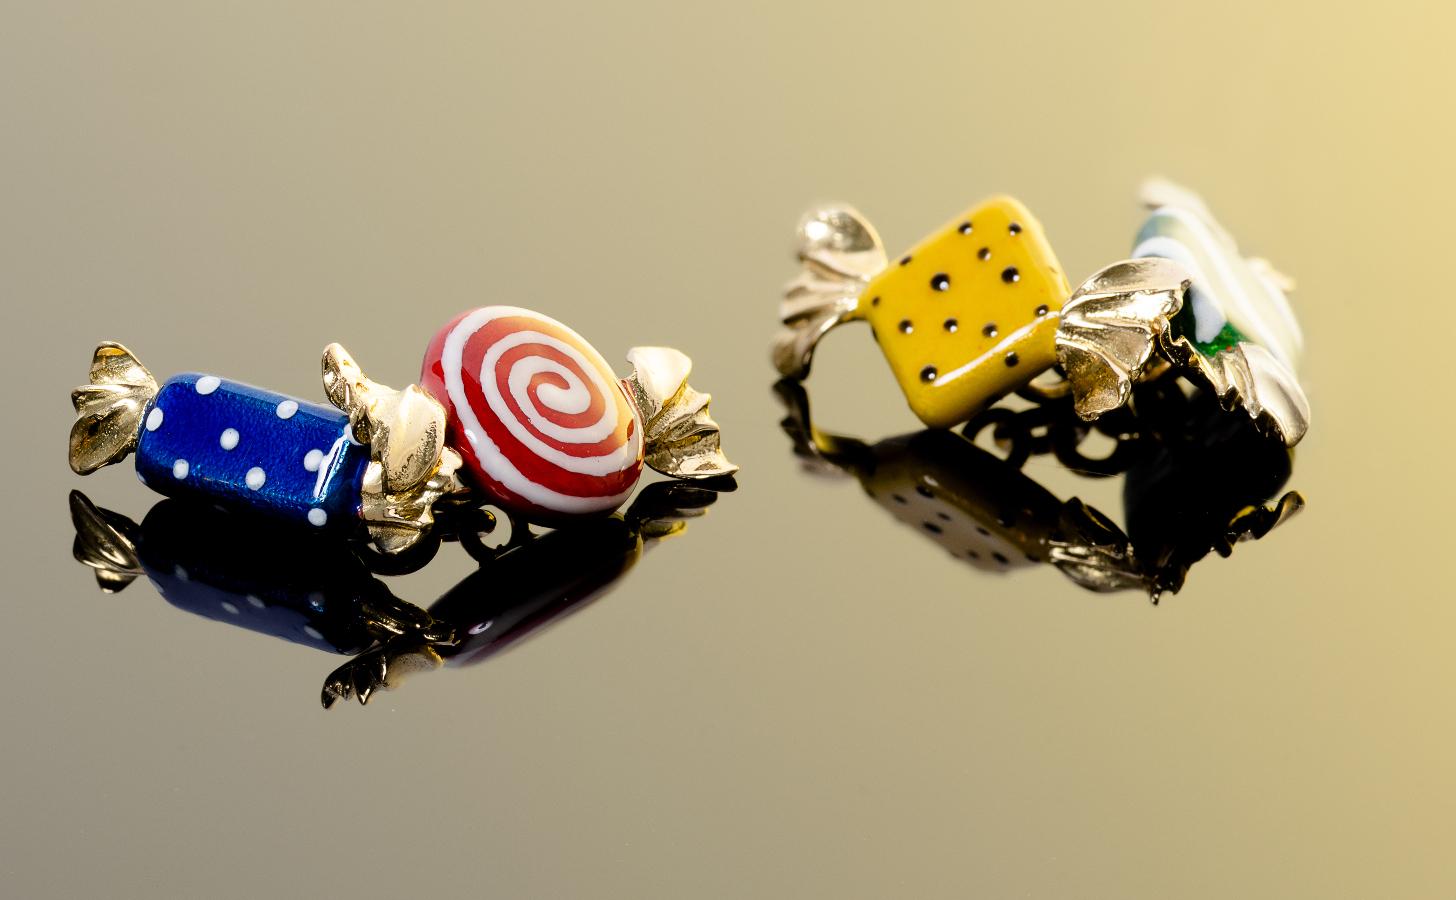  Pair of cufflinks designed as wrapped candy, applied with red, blue, white and green translucent enamel. 

Gold chain link connections.   

Mounted in 18Kt yellow gold